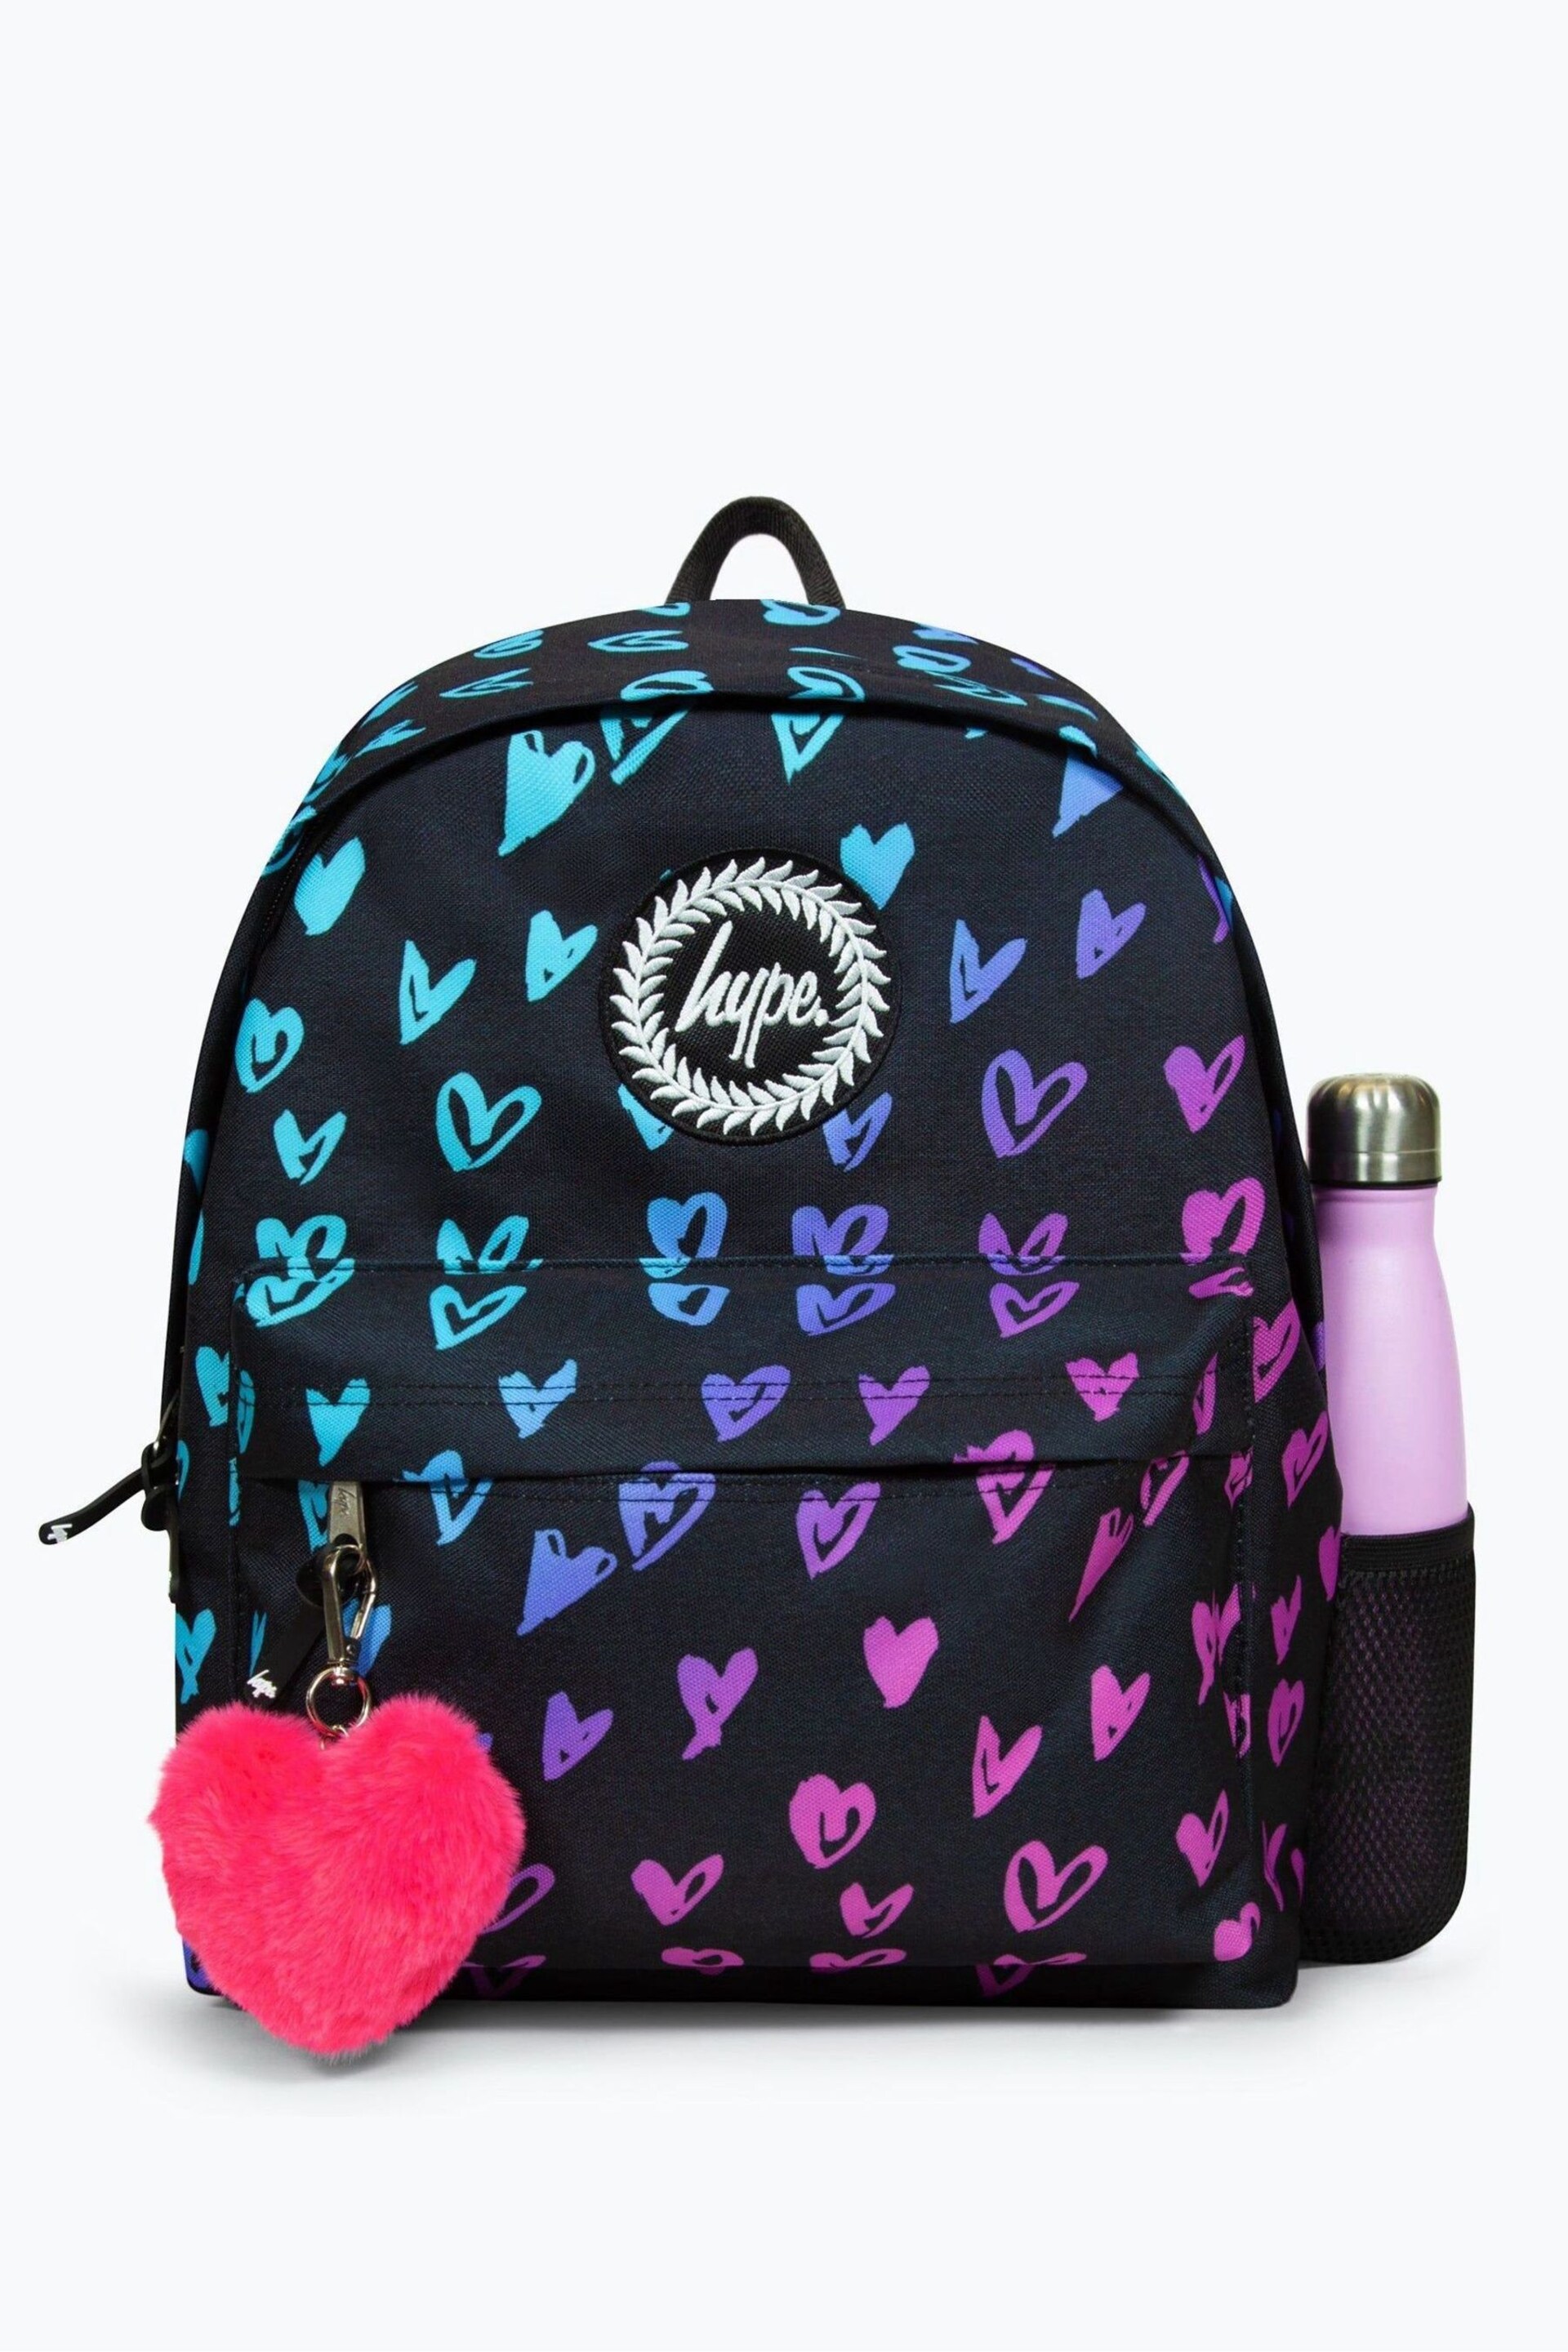 Hype. Scribble Hearts Pom Pom Backpack - Image 1 of 8